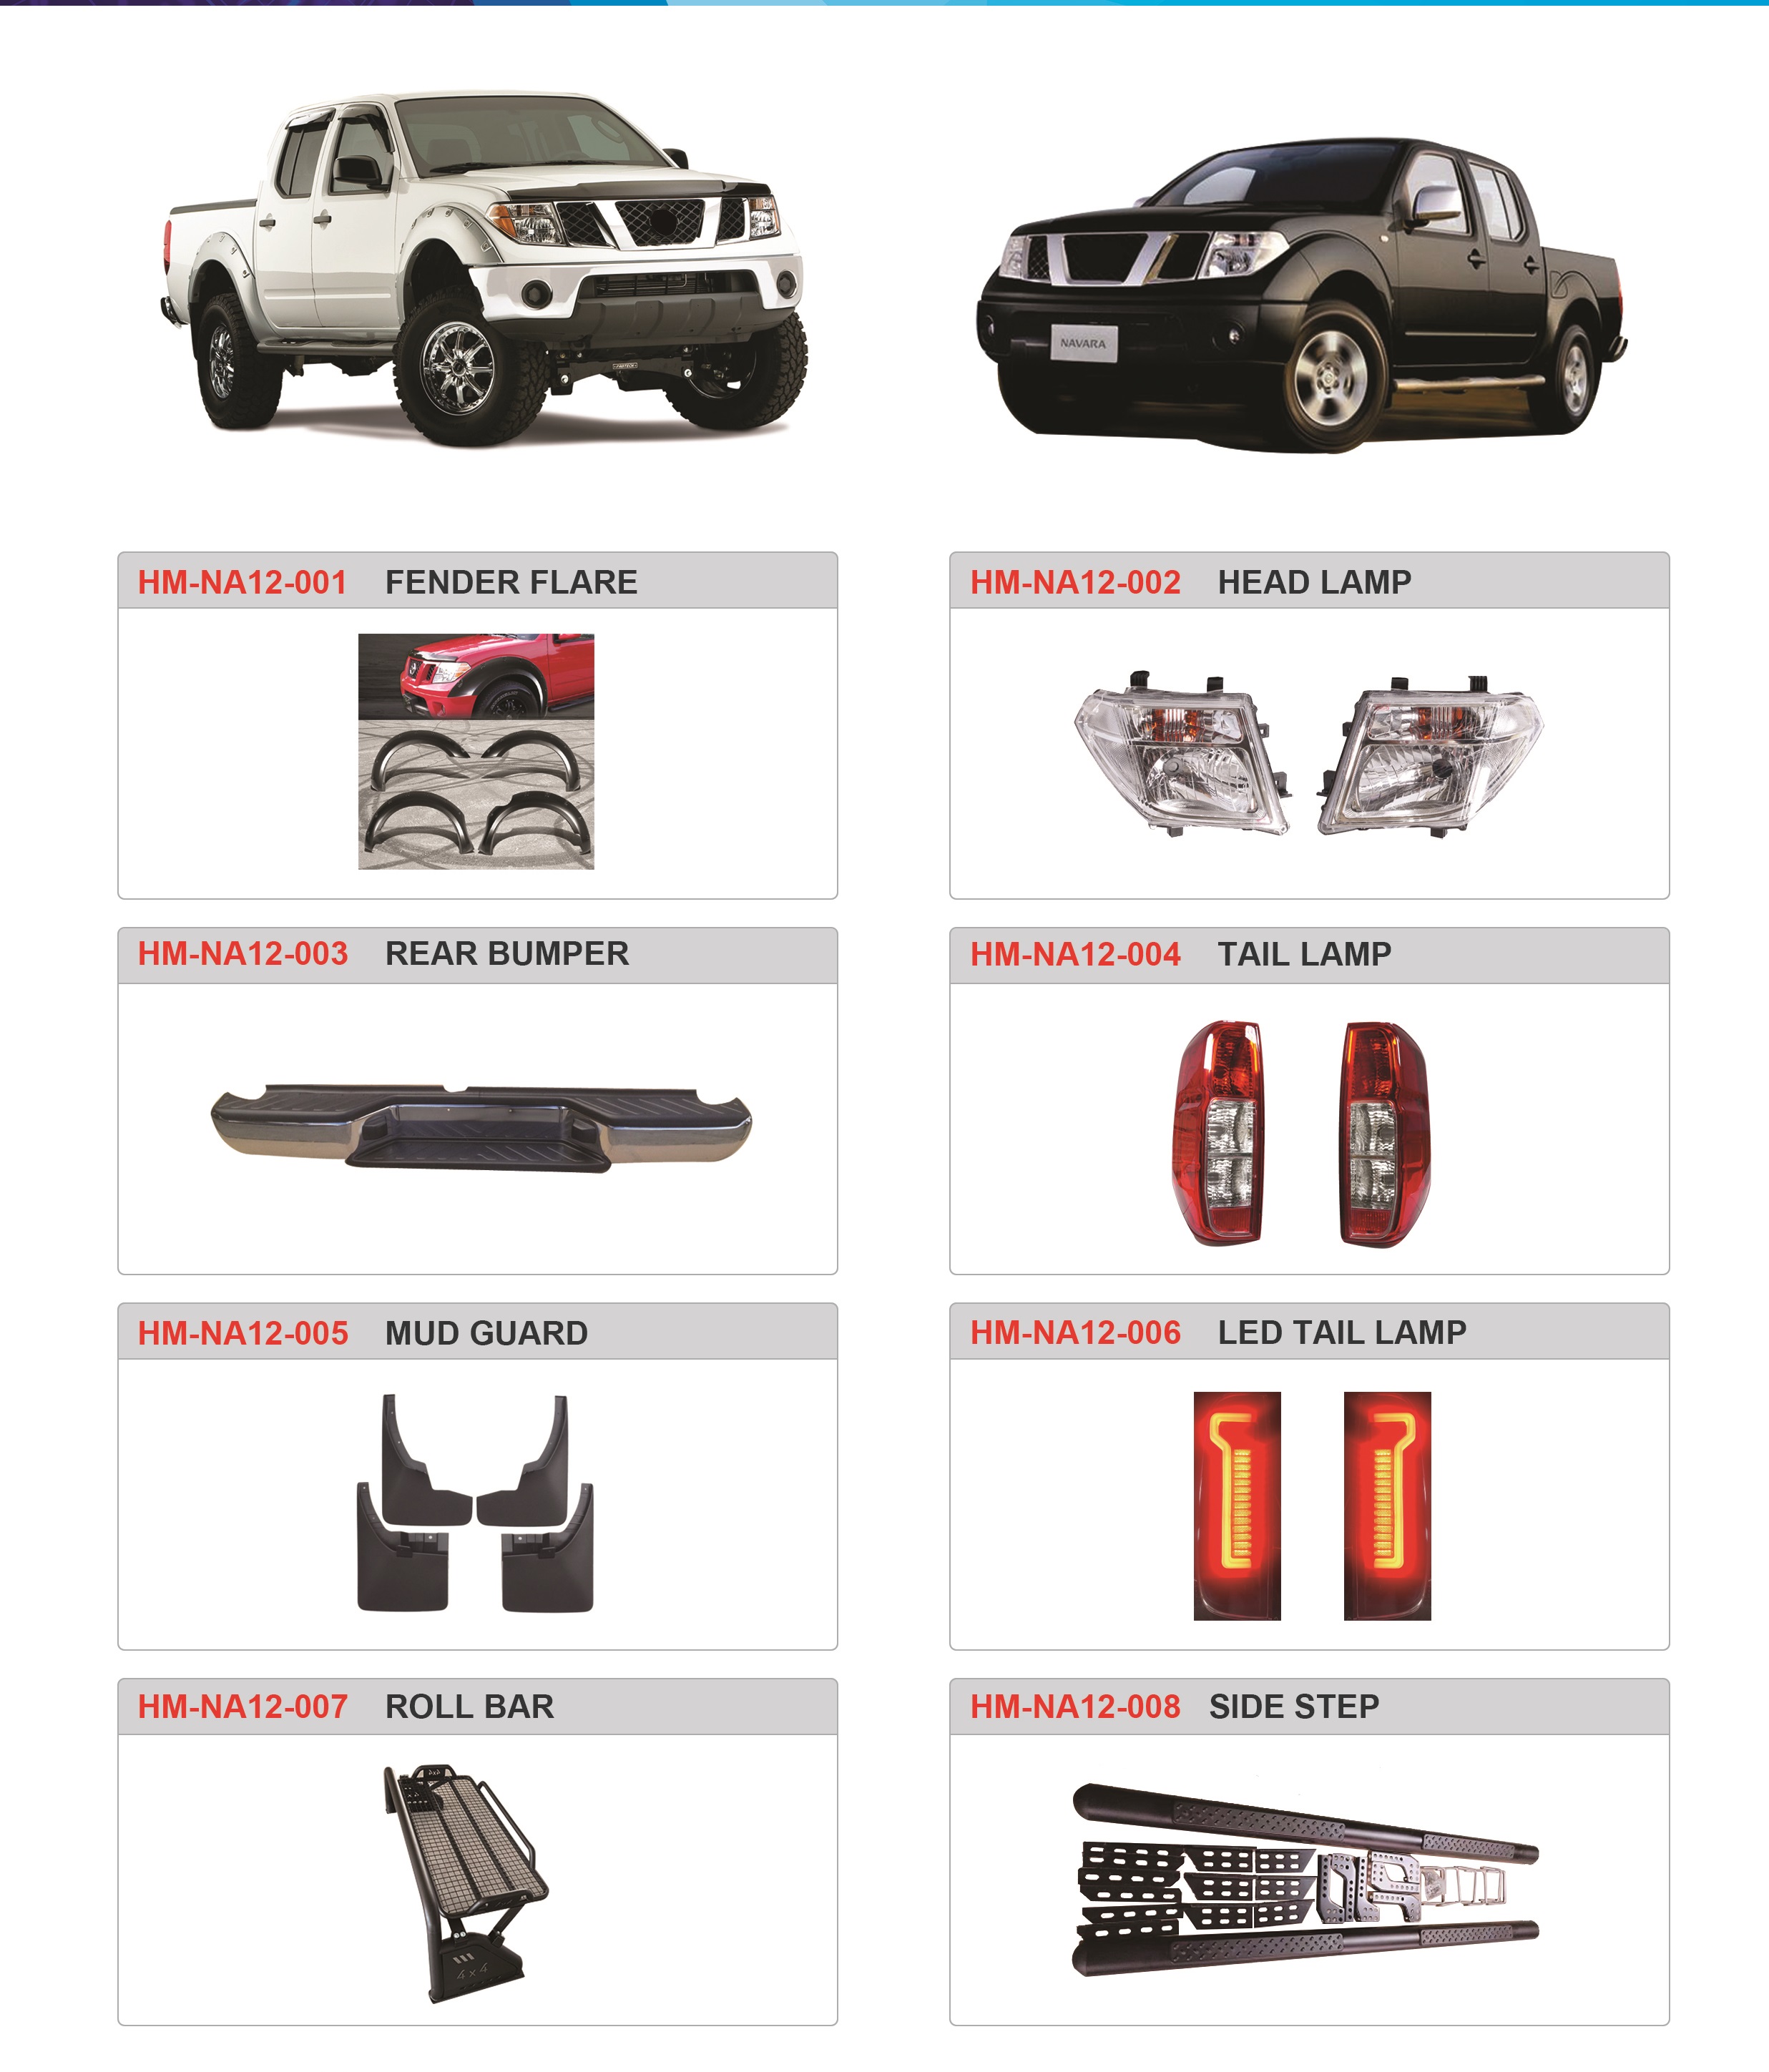 FOR 05-12 NAVARA FENDER FLARE Featured Image